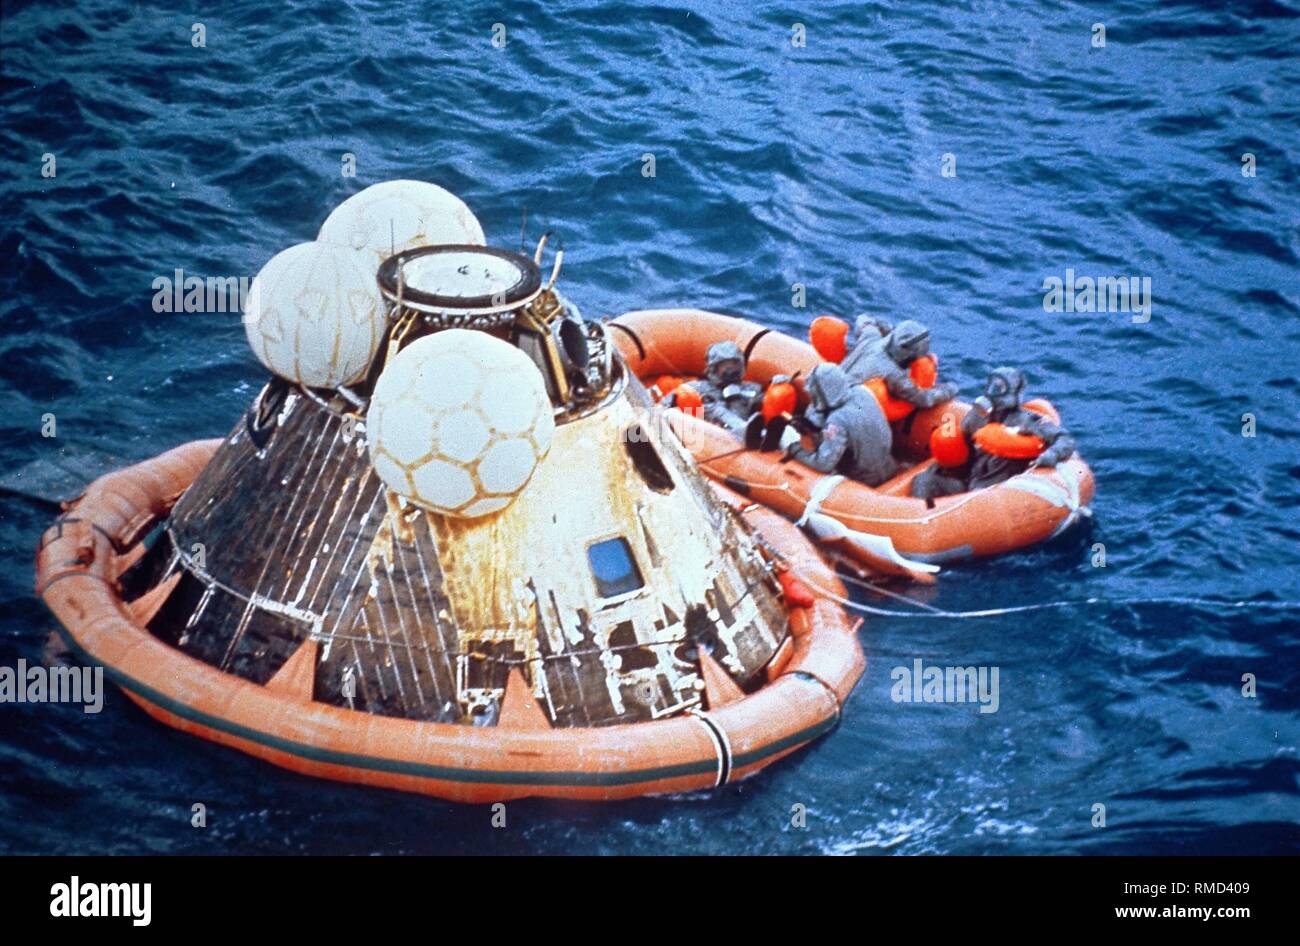 Navy divers salvage the command module of Apollo 11 with a dinghy after landing in the Pacific. Apollo 11 was the first manned Moon landing mission, and with it the most significant space mission for humanity. Stock Photo